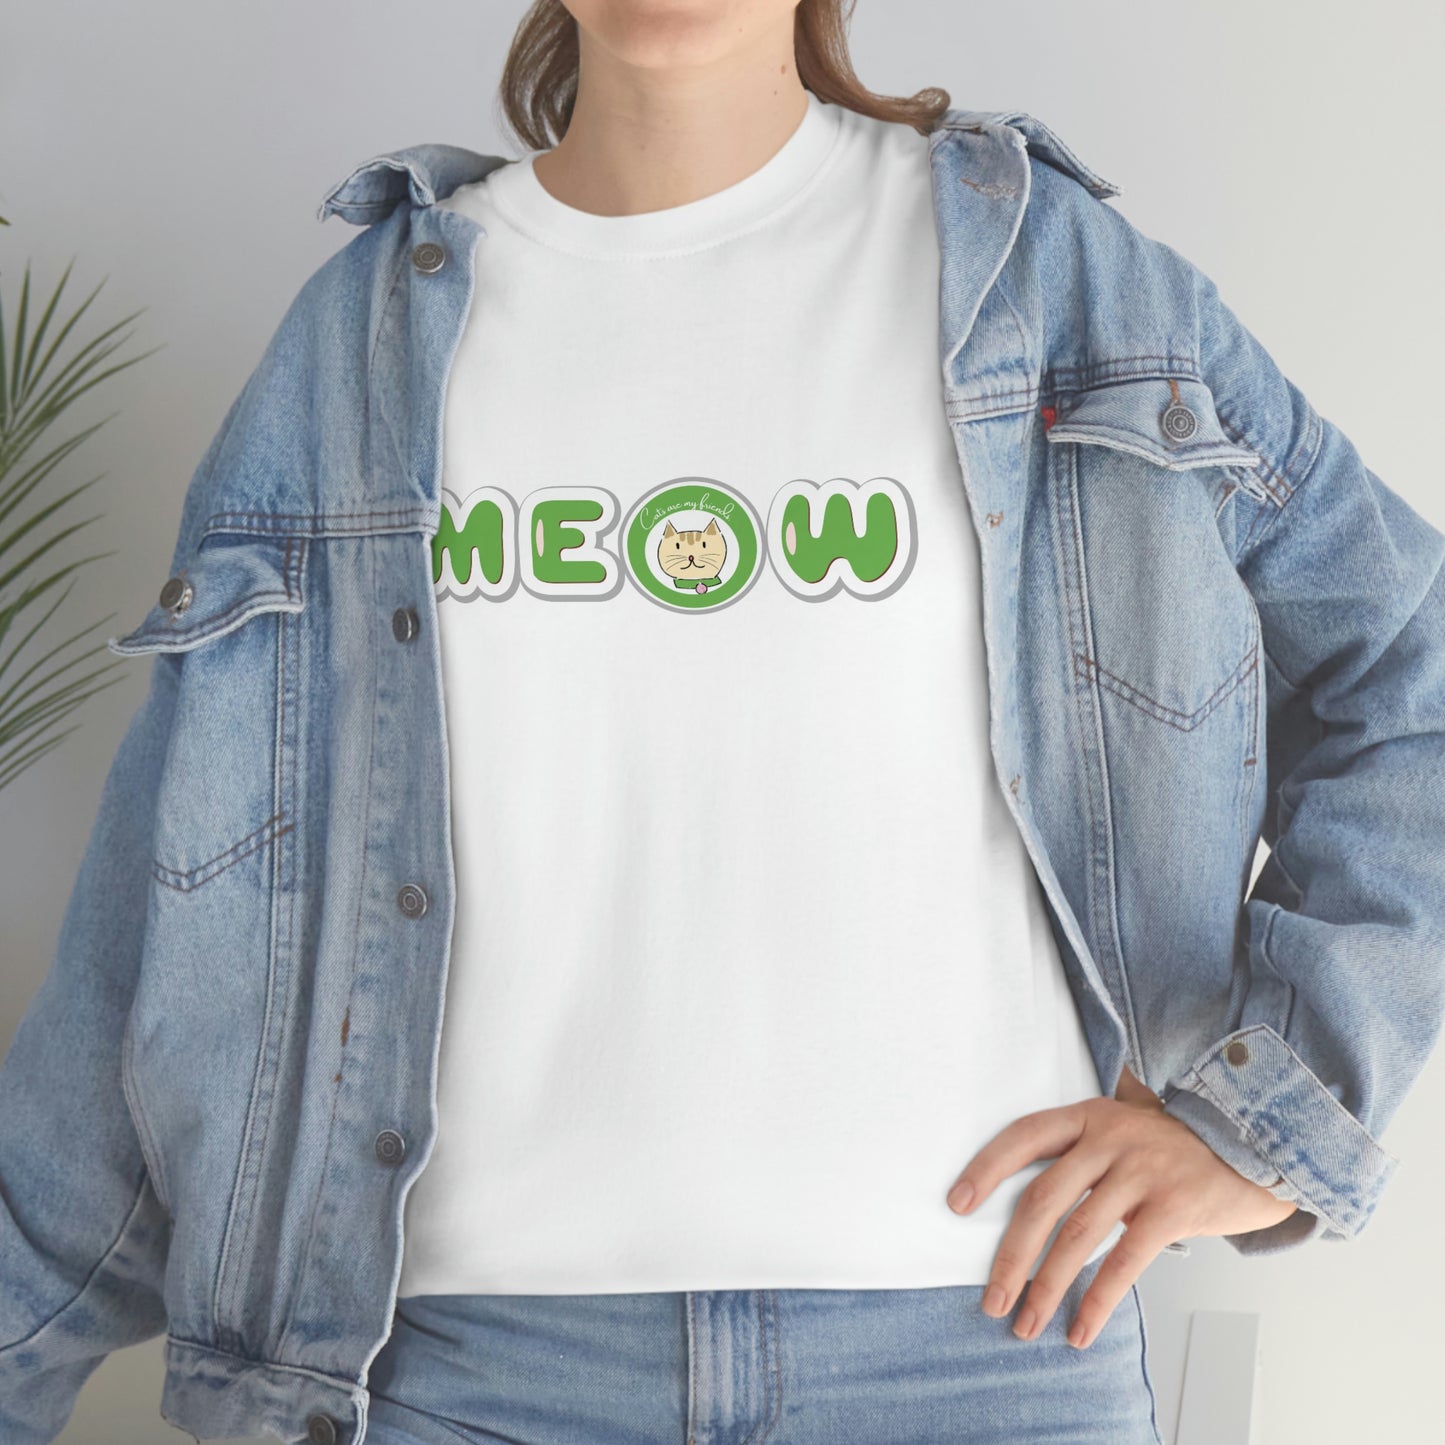 Meow logo with " Cats are my friends" design Cotton Tee